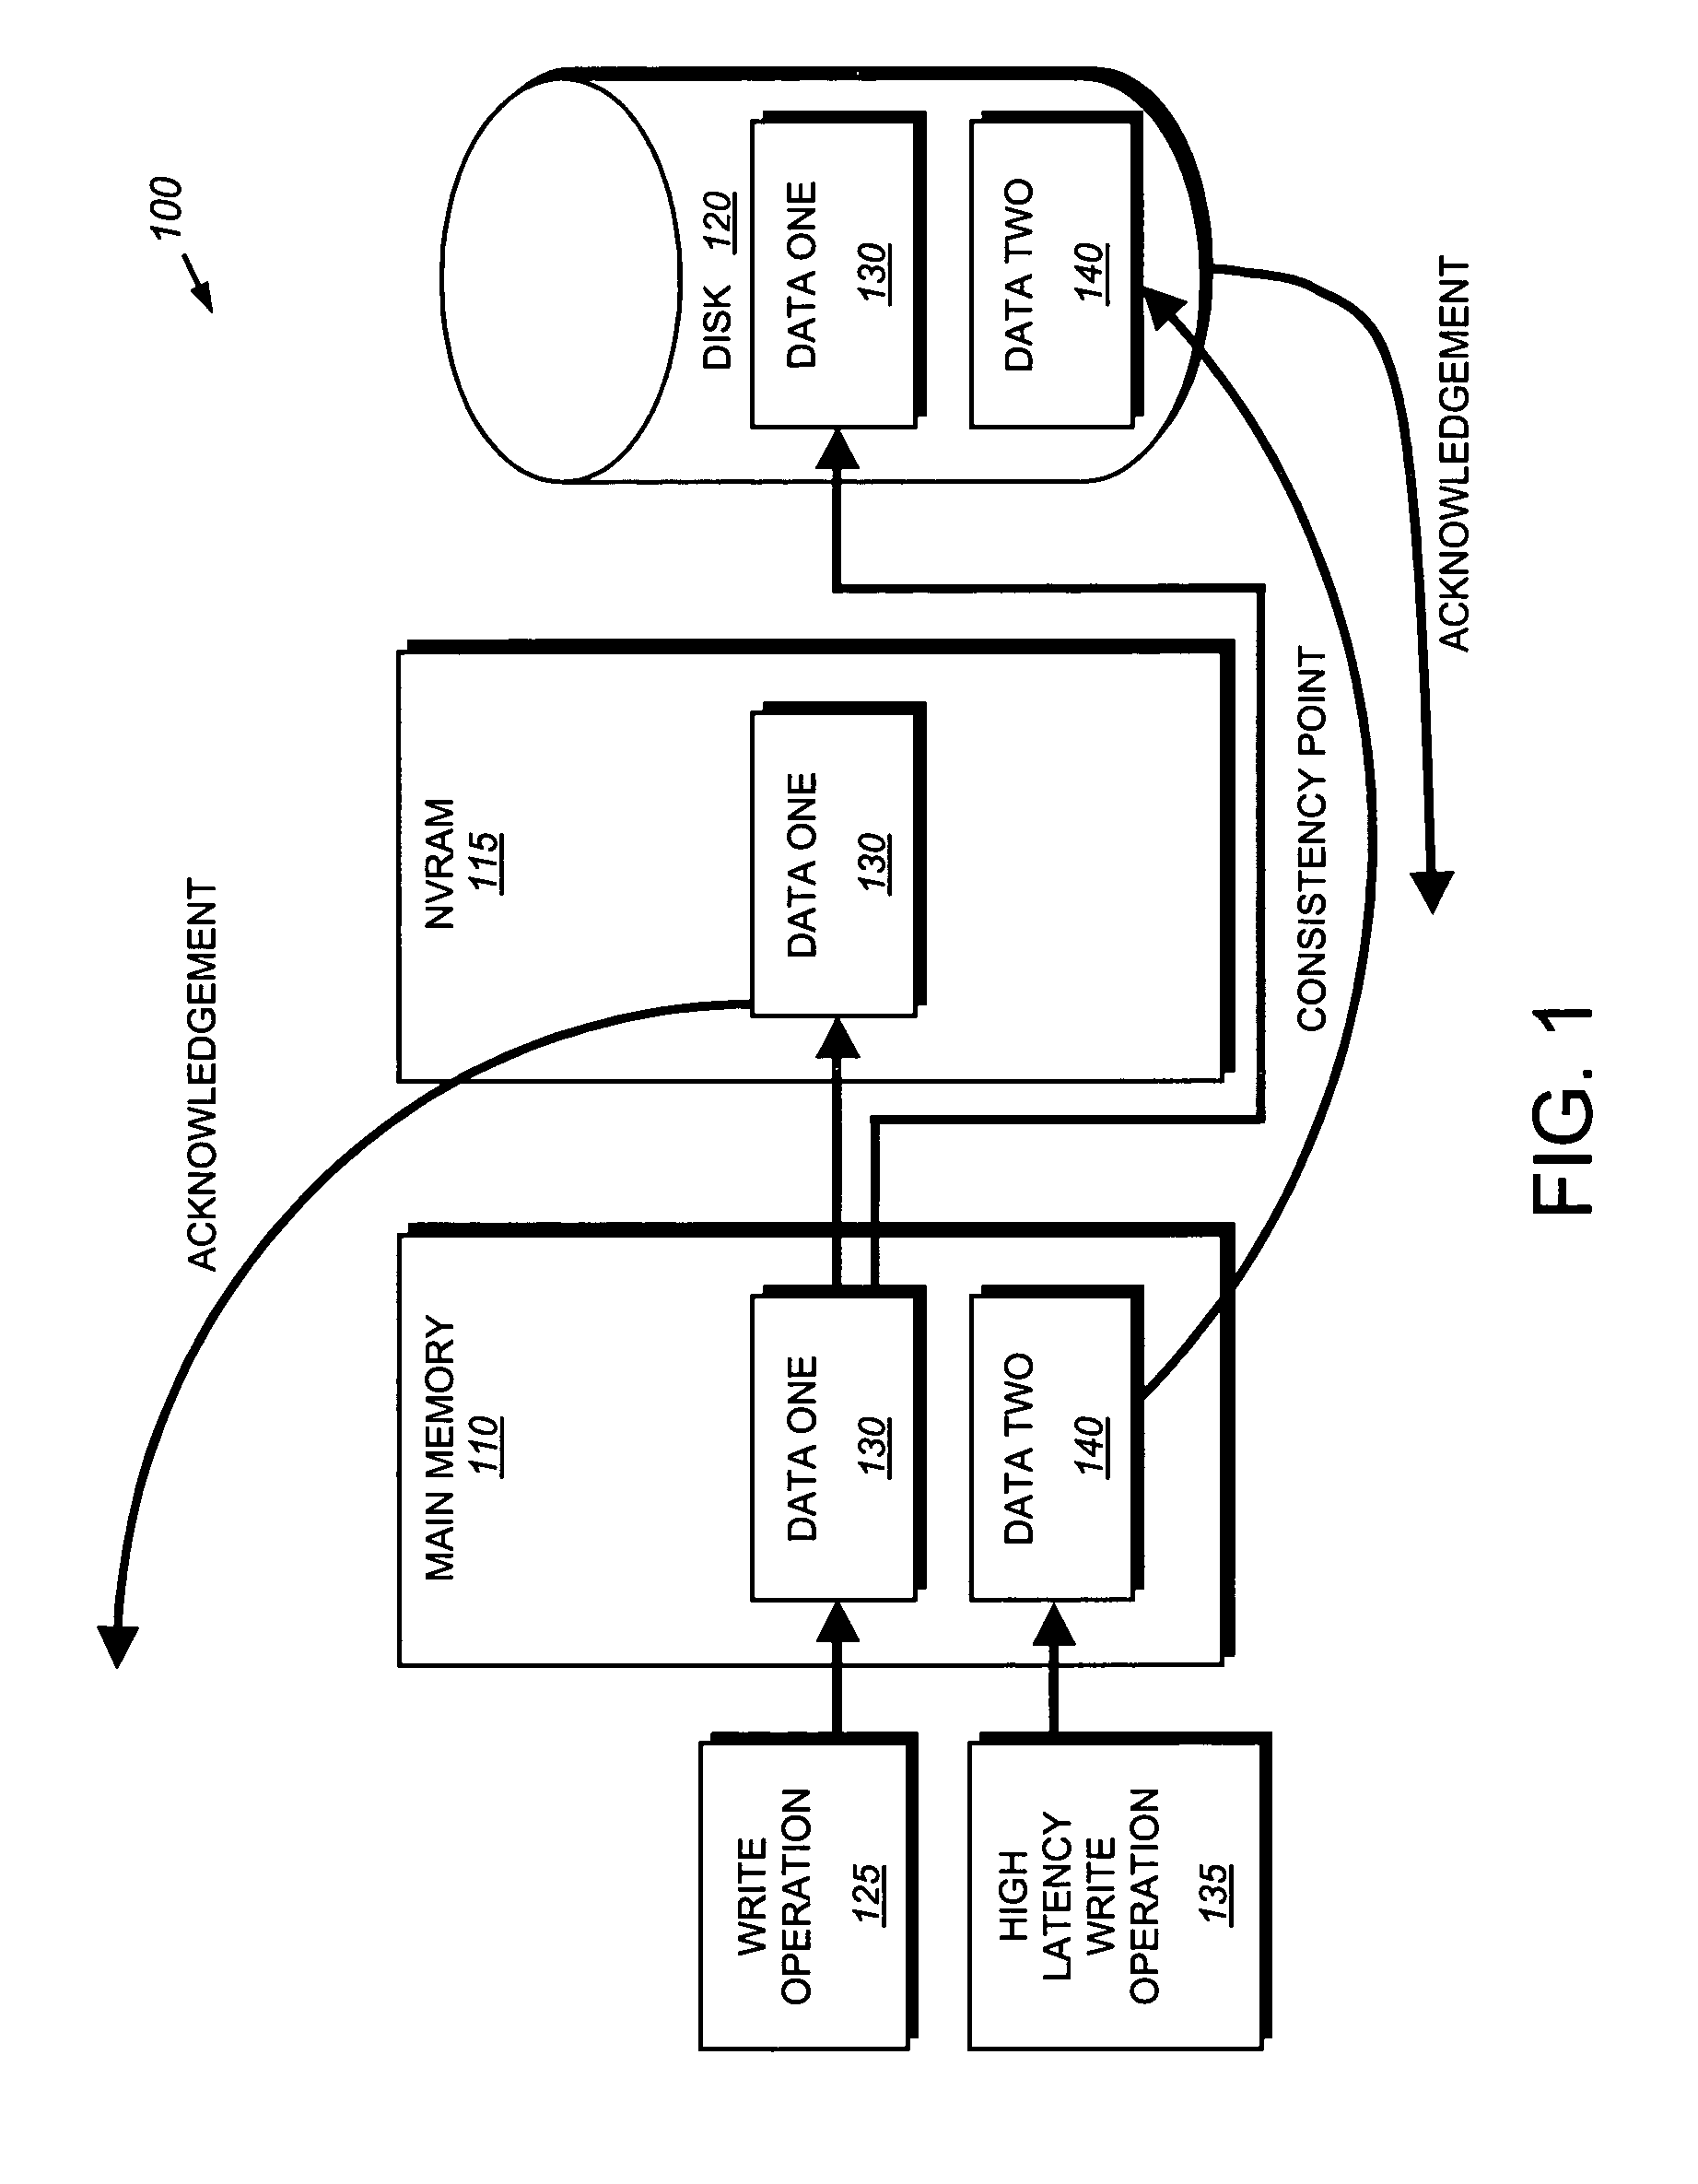 System and method for reprioritizing high-latency input/output operations